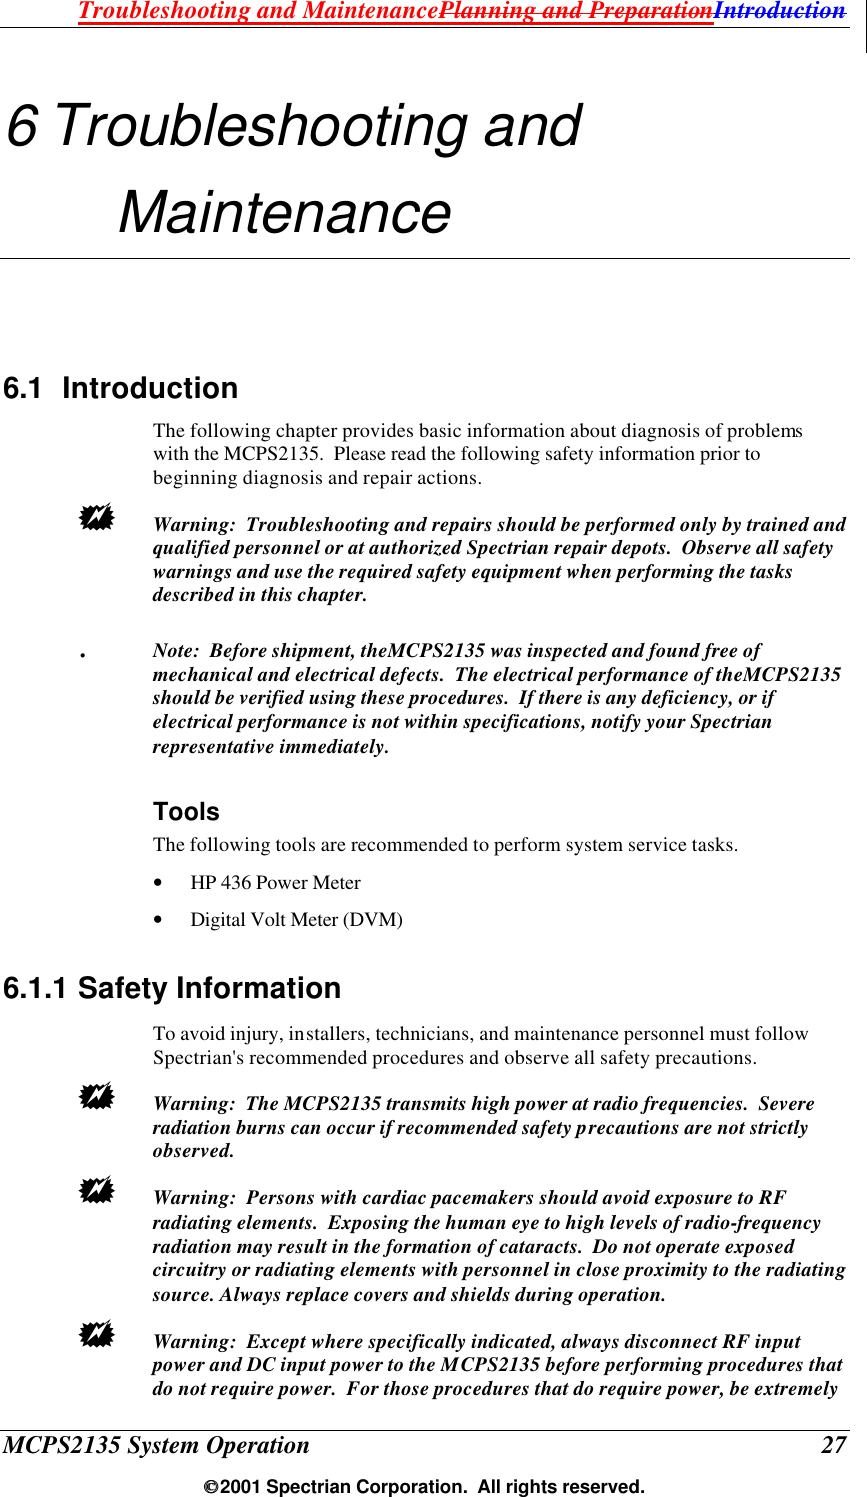 Troubleshooting and MaintenancePlanning and PreparationIntroduction MCPS2135 System Operation  27  2001 Spectrian Corporation.  All rights reserved. 6 Troubleshooting and Maintenance 6.1 Introduction The following chapter provides basic information about diagnosis of problems with the MCPS2135.  Please read the following safety information prior to beginning diagnosis and repair actions. +  Warning:  Troubleshooting and repairs should be performed only by trained and qualified personnel or at authorized Spectrian repair depots.  Observe all safety warnings and use the required safety equipment when performing the tasks described in this chapter. .  Note:  Before shipment, theMCPS2135 was inspected and found free of mechanical and electrical defects.  The electrical performance of theMCPS2135 should be verified using these procedures.  If there is any deficiency, or if electrical performance is not within specifications, notify your Spectrian representative immediately. Tools  The following tools are recommended to perform system service tasks. • HP 436 Power Meter • Digital Volt Meter (DVM) 6.1.1 Safety Information To avoid injury, installers, technicians, and maintenance personnel must follow Spectrian&apos;s recommended procedures and observe all safety precautions.  +  Warning:  The MCPS2135 transmits high power at radio frequencies.  Severe radiation burns can occur if recommended safety precautions are not strictly observed. +  Warning:  Persons with cardiac pacemakers should avoid exposure to RF radiating elements.  Exposing the human eye to high levels of radio-frequency radiation may result in the formation of cataracts.  Do not operate exposed circuitry or radiating elements with personnel in close proximity to the radiating source. Always replace covers and shields during operation. +  Warning:  Except where specifically indicated, always disconnect RF input power and DC input power to the MCPS2135 before performing procedures that do not require power.  For those procedures that do require power, be extremely 